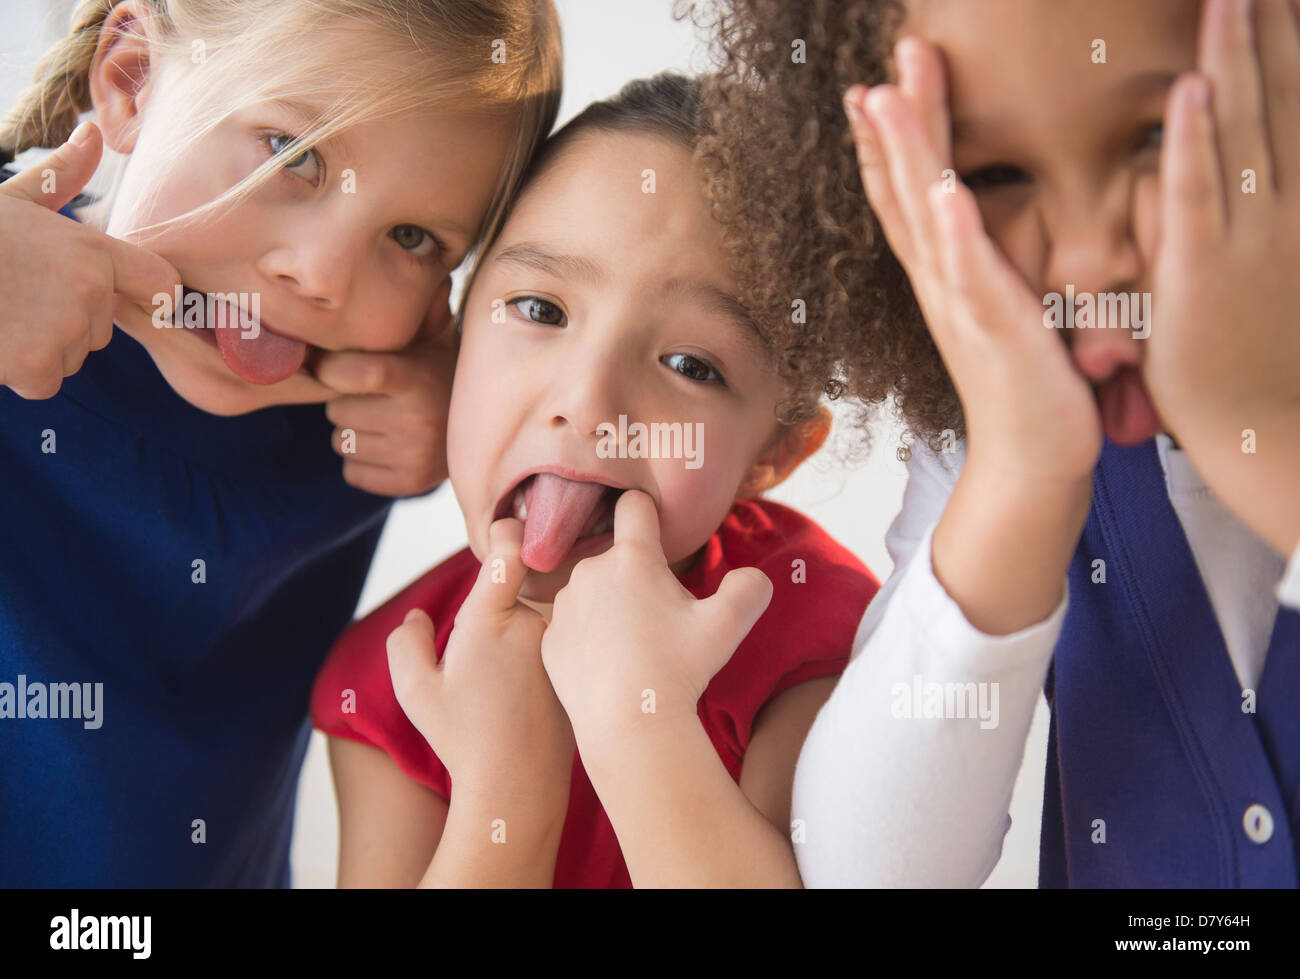 Girls making faces together Stock Photo